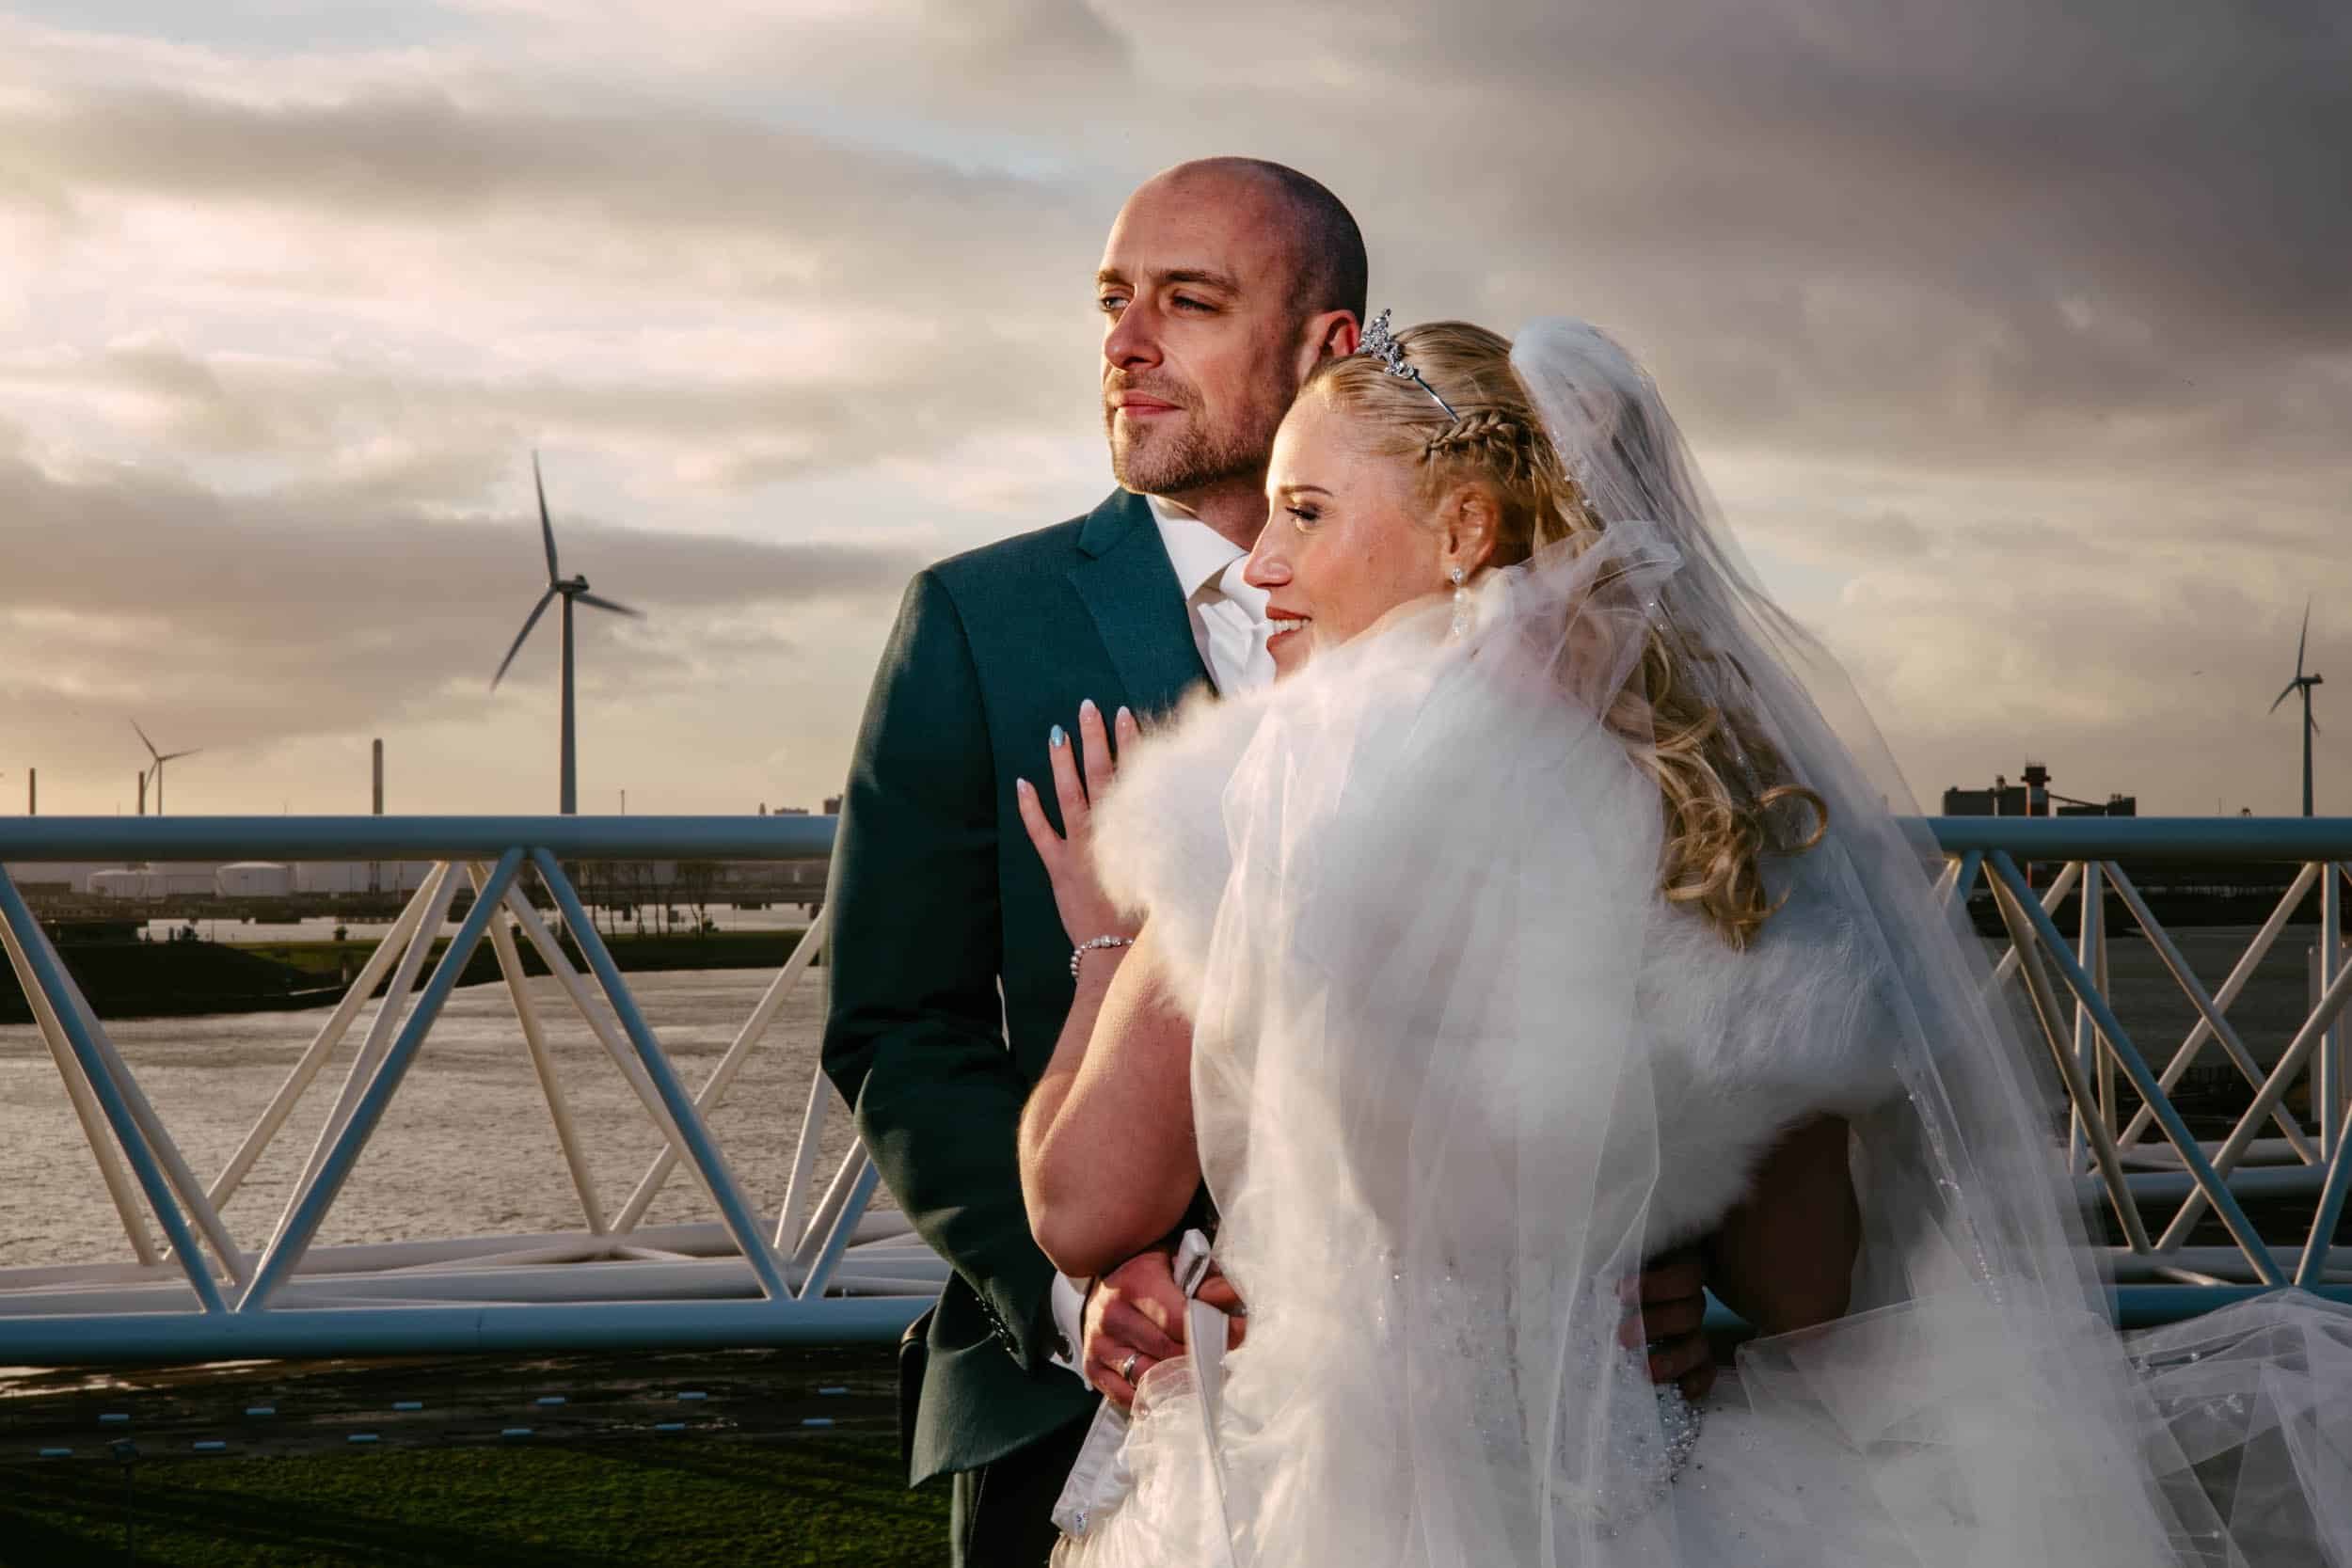 A wedding couple pose in front of the wind turbines at My torpedo shed.